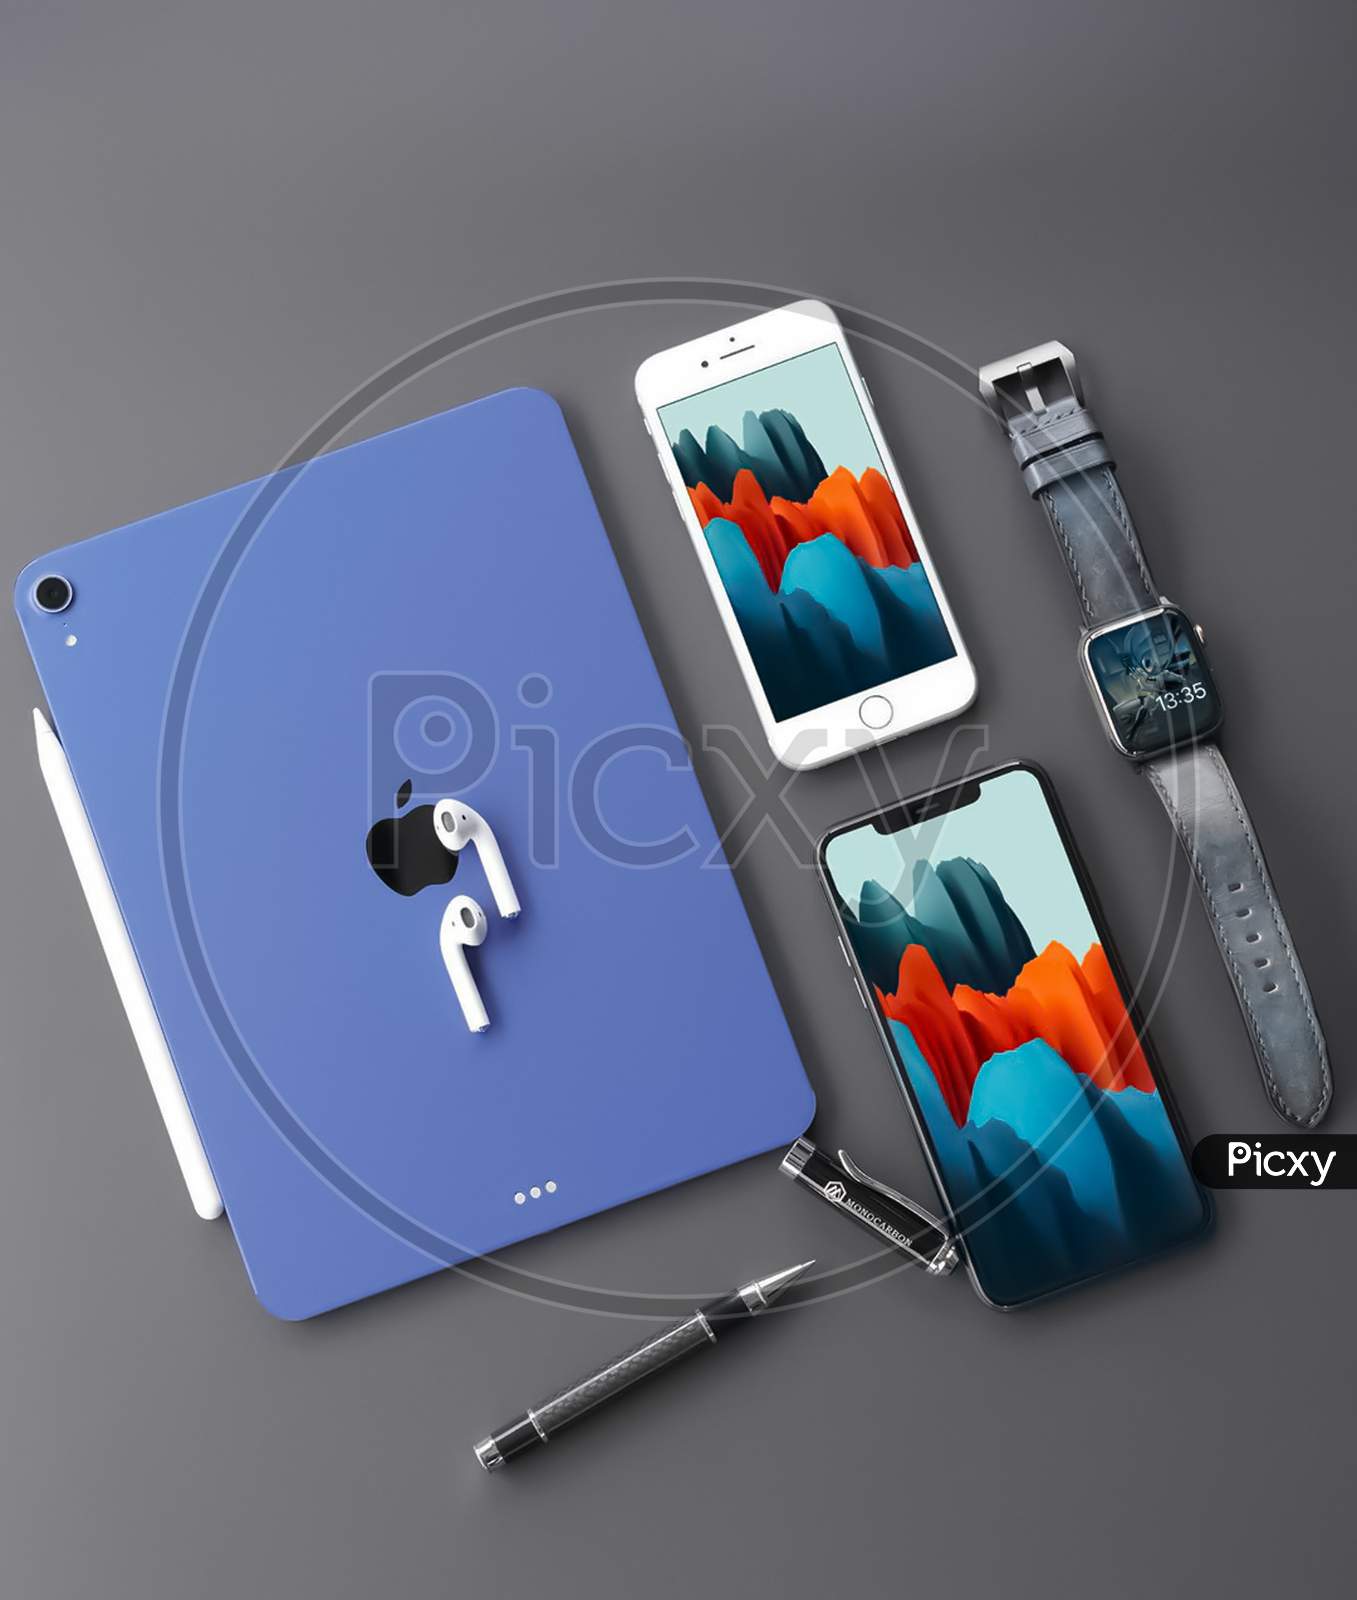 Blue ipad with Phone, watch, pen and ipad.